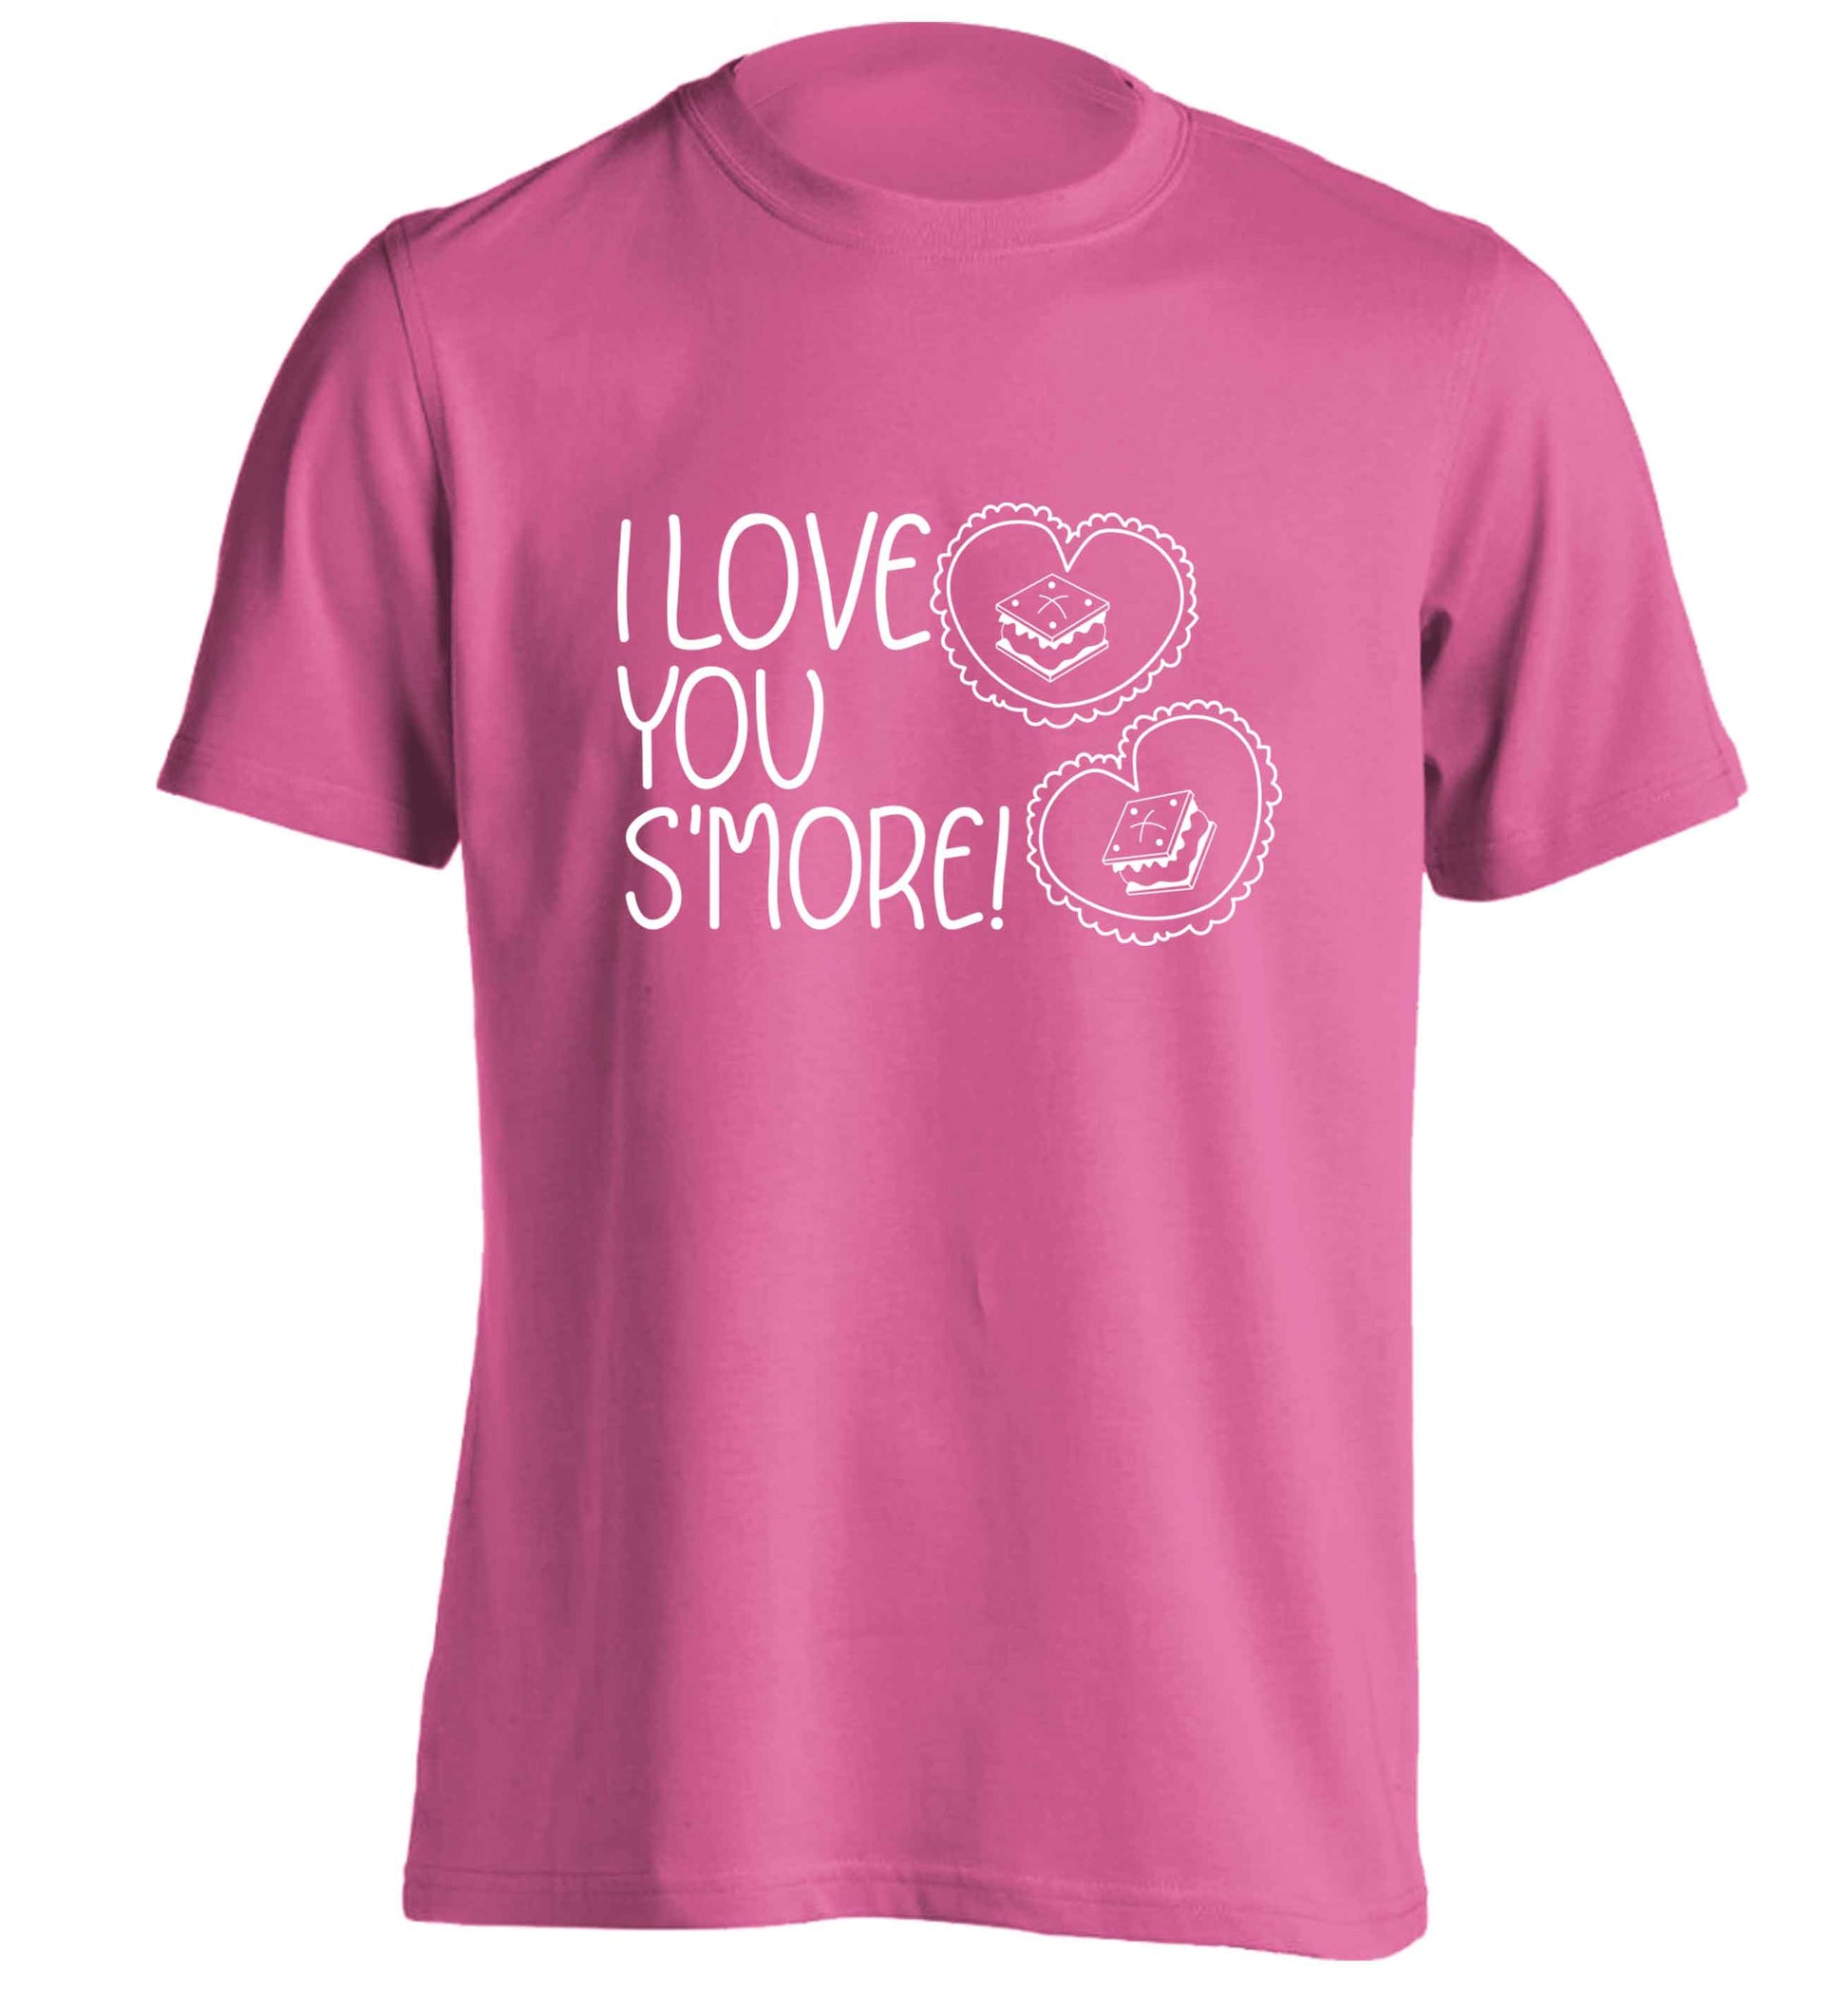 I love you s'more than anything adults unisex pink Tshirt 2XL